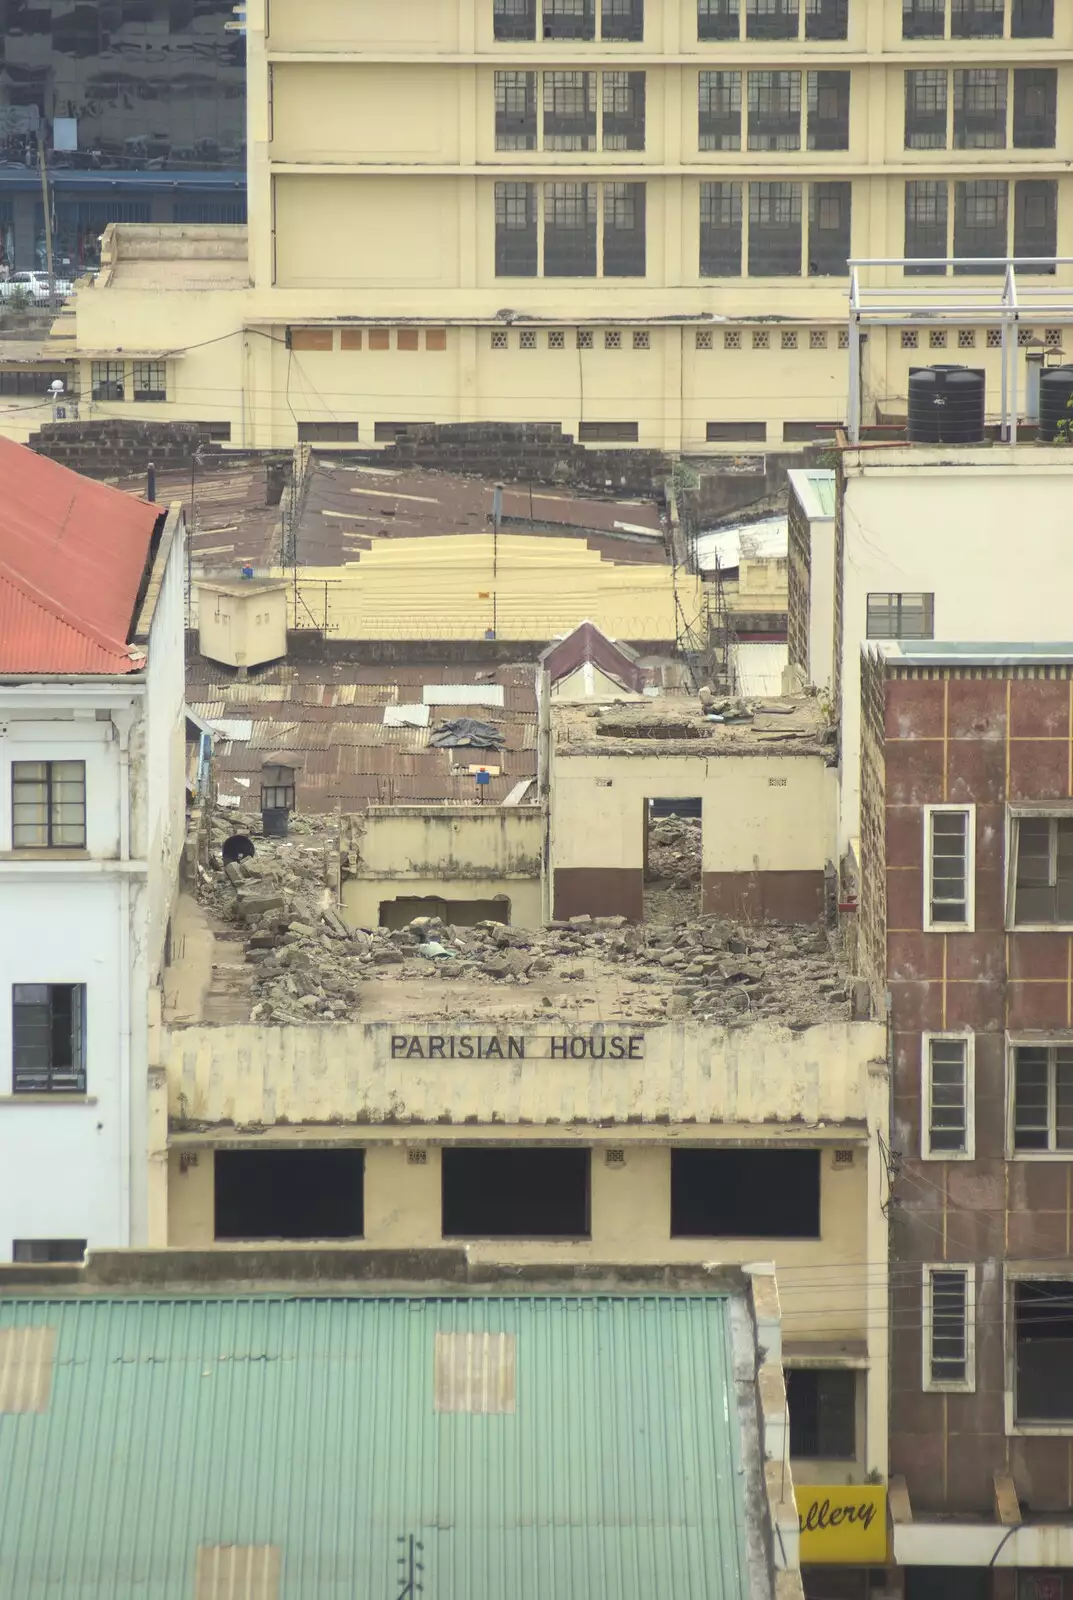 Buildings in various stages of disarray, from Nairobi and the Road to Maasai Mara, Kenya, Africa - 1st November 2010